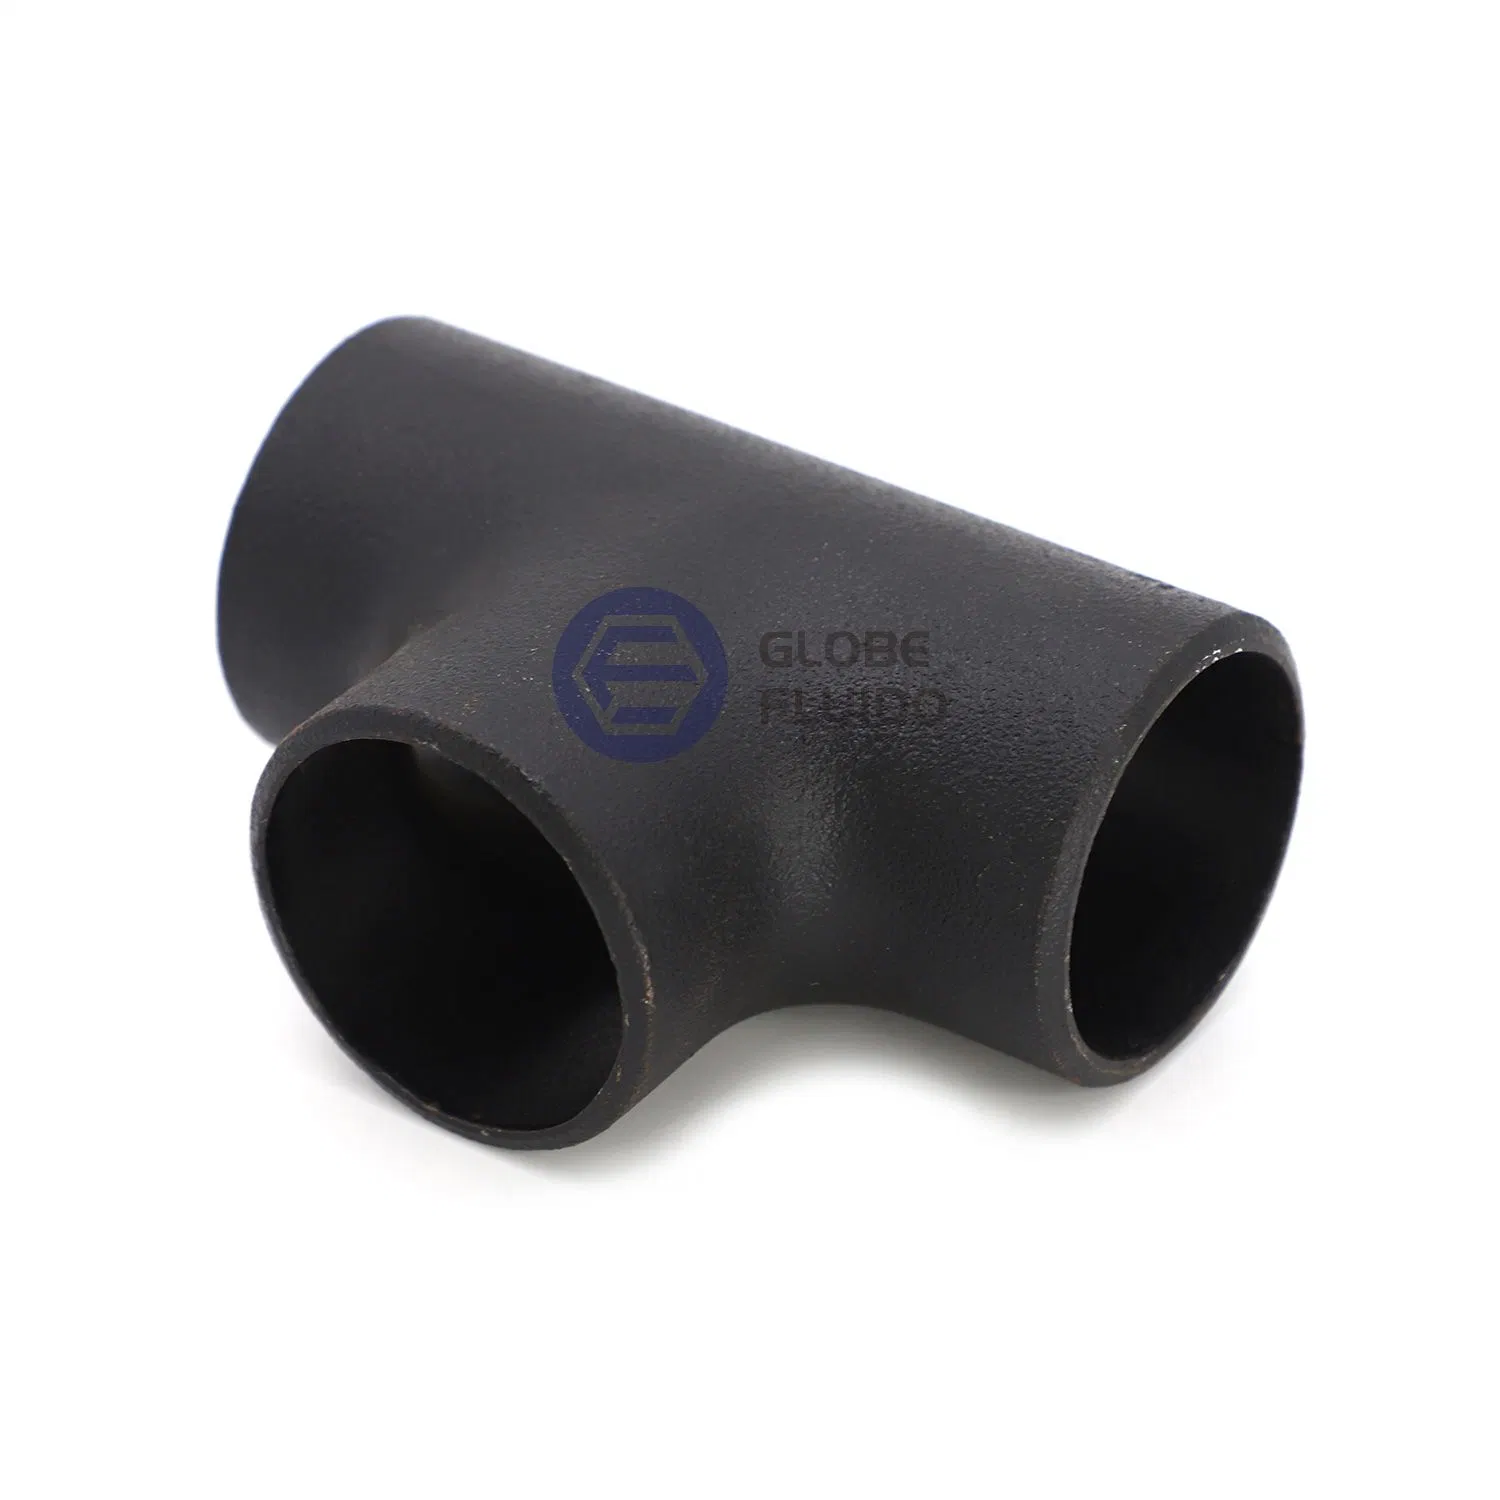 ASME/ANSI B16.9 Carbon Steel&Stainless Steel Std/Sch40/Sch80 Butt Welding Pipe Fittings for Plumbing